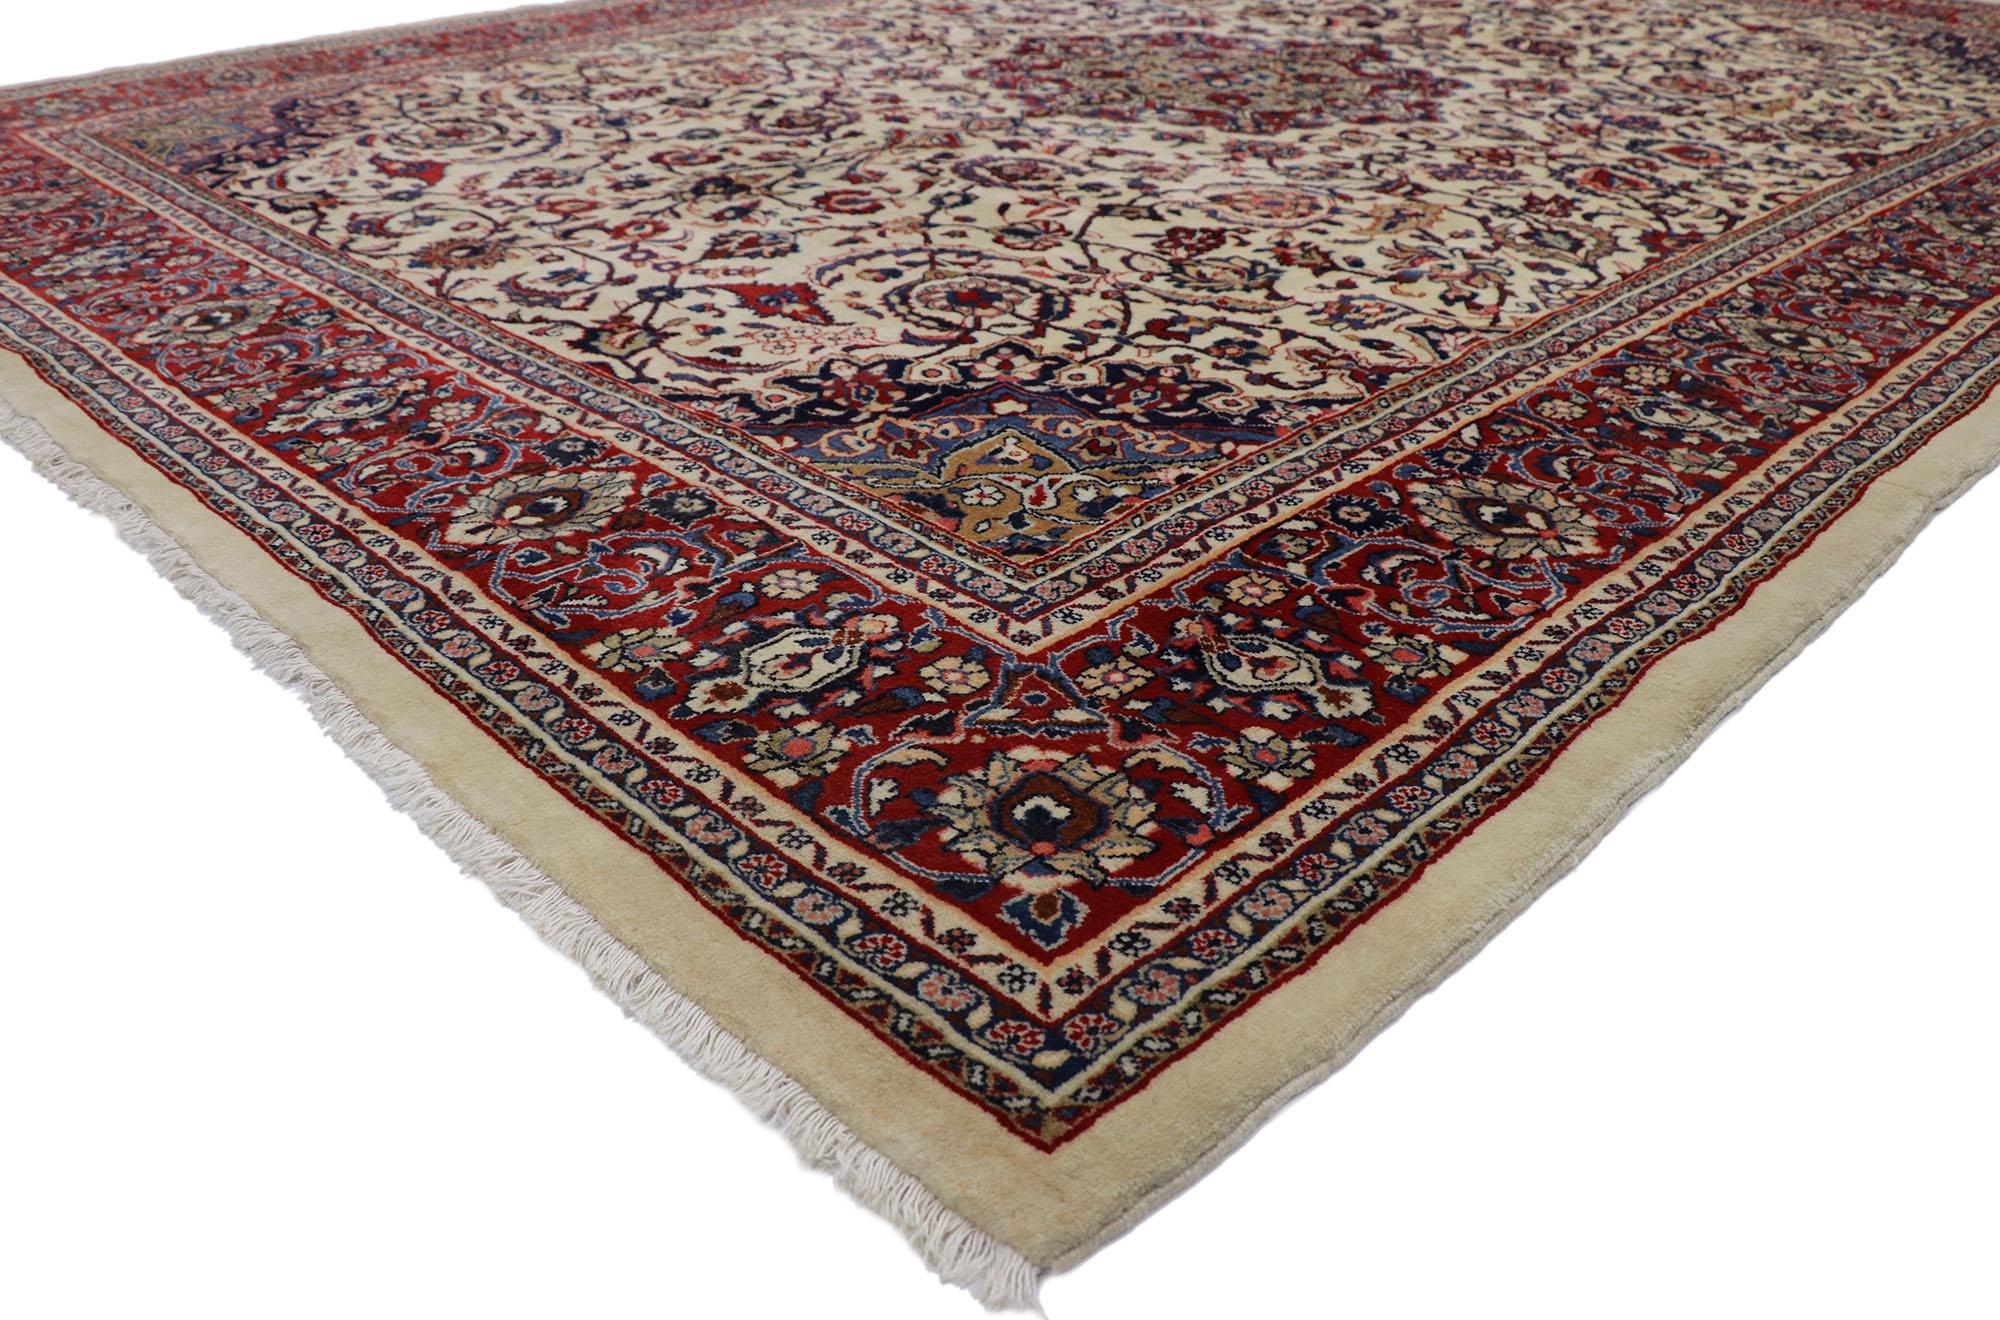 77675 Antique Persian Mahal rug, 09'00 x 12'01. Emanating traditional style with incredible detail and texture, this hand knotted wool antique Persian Mahal rug is a captivating vision of woven beauty. The timeless design and sophisticated color